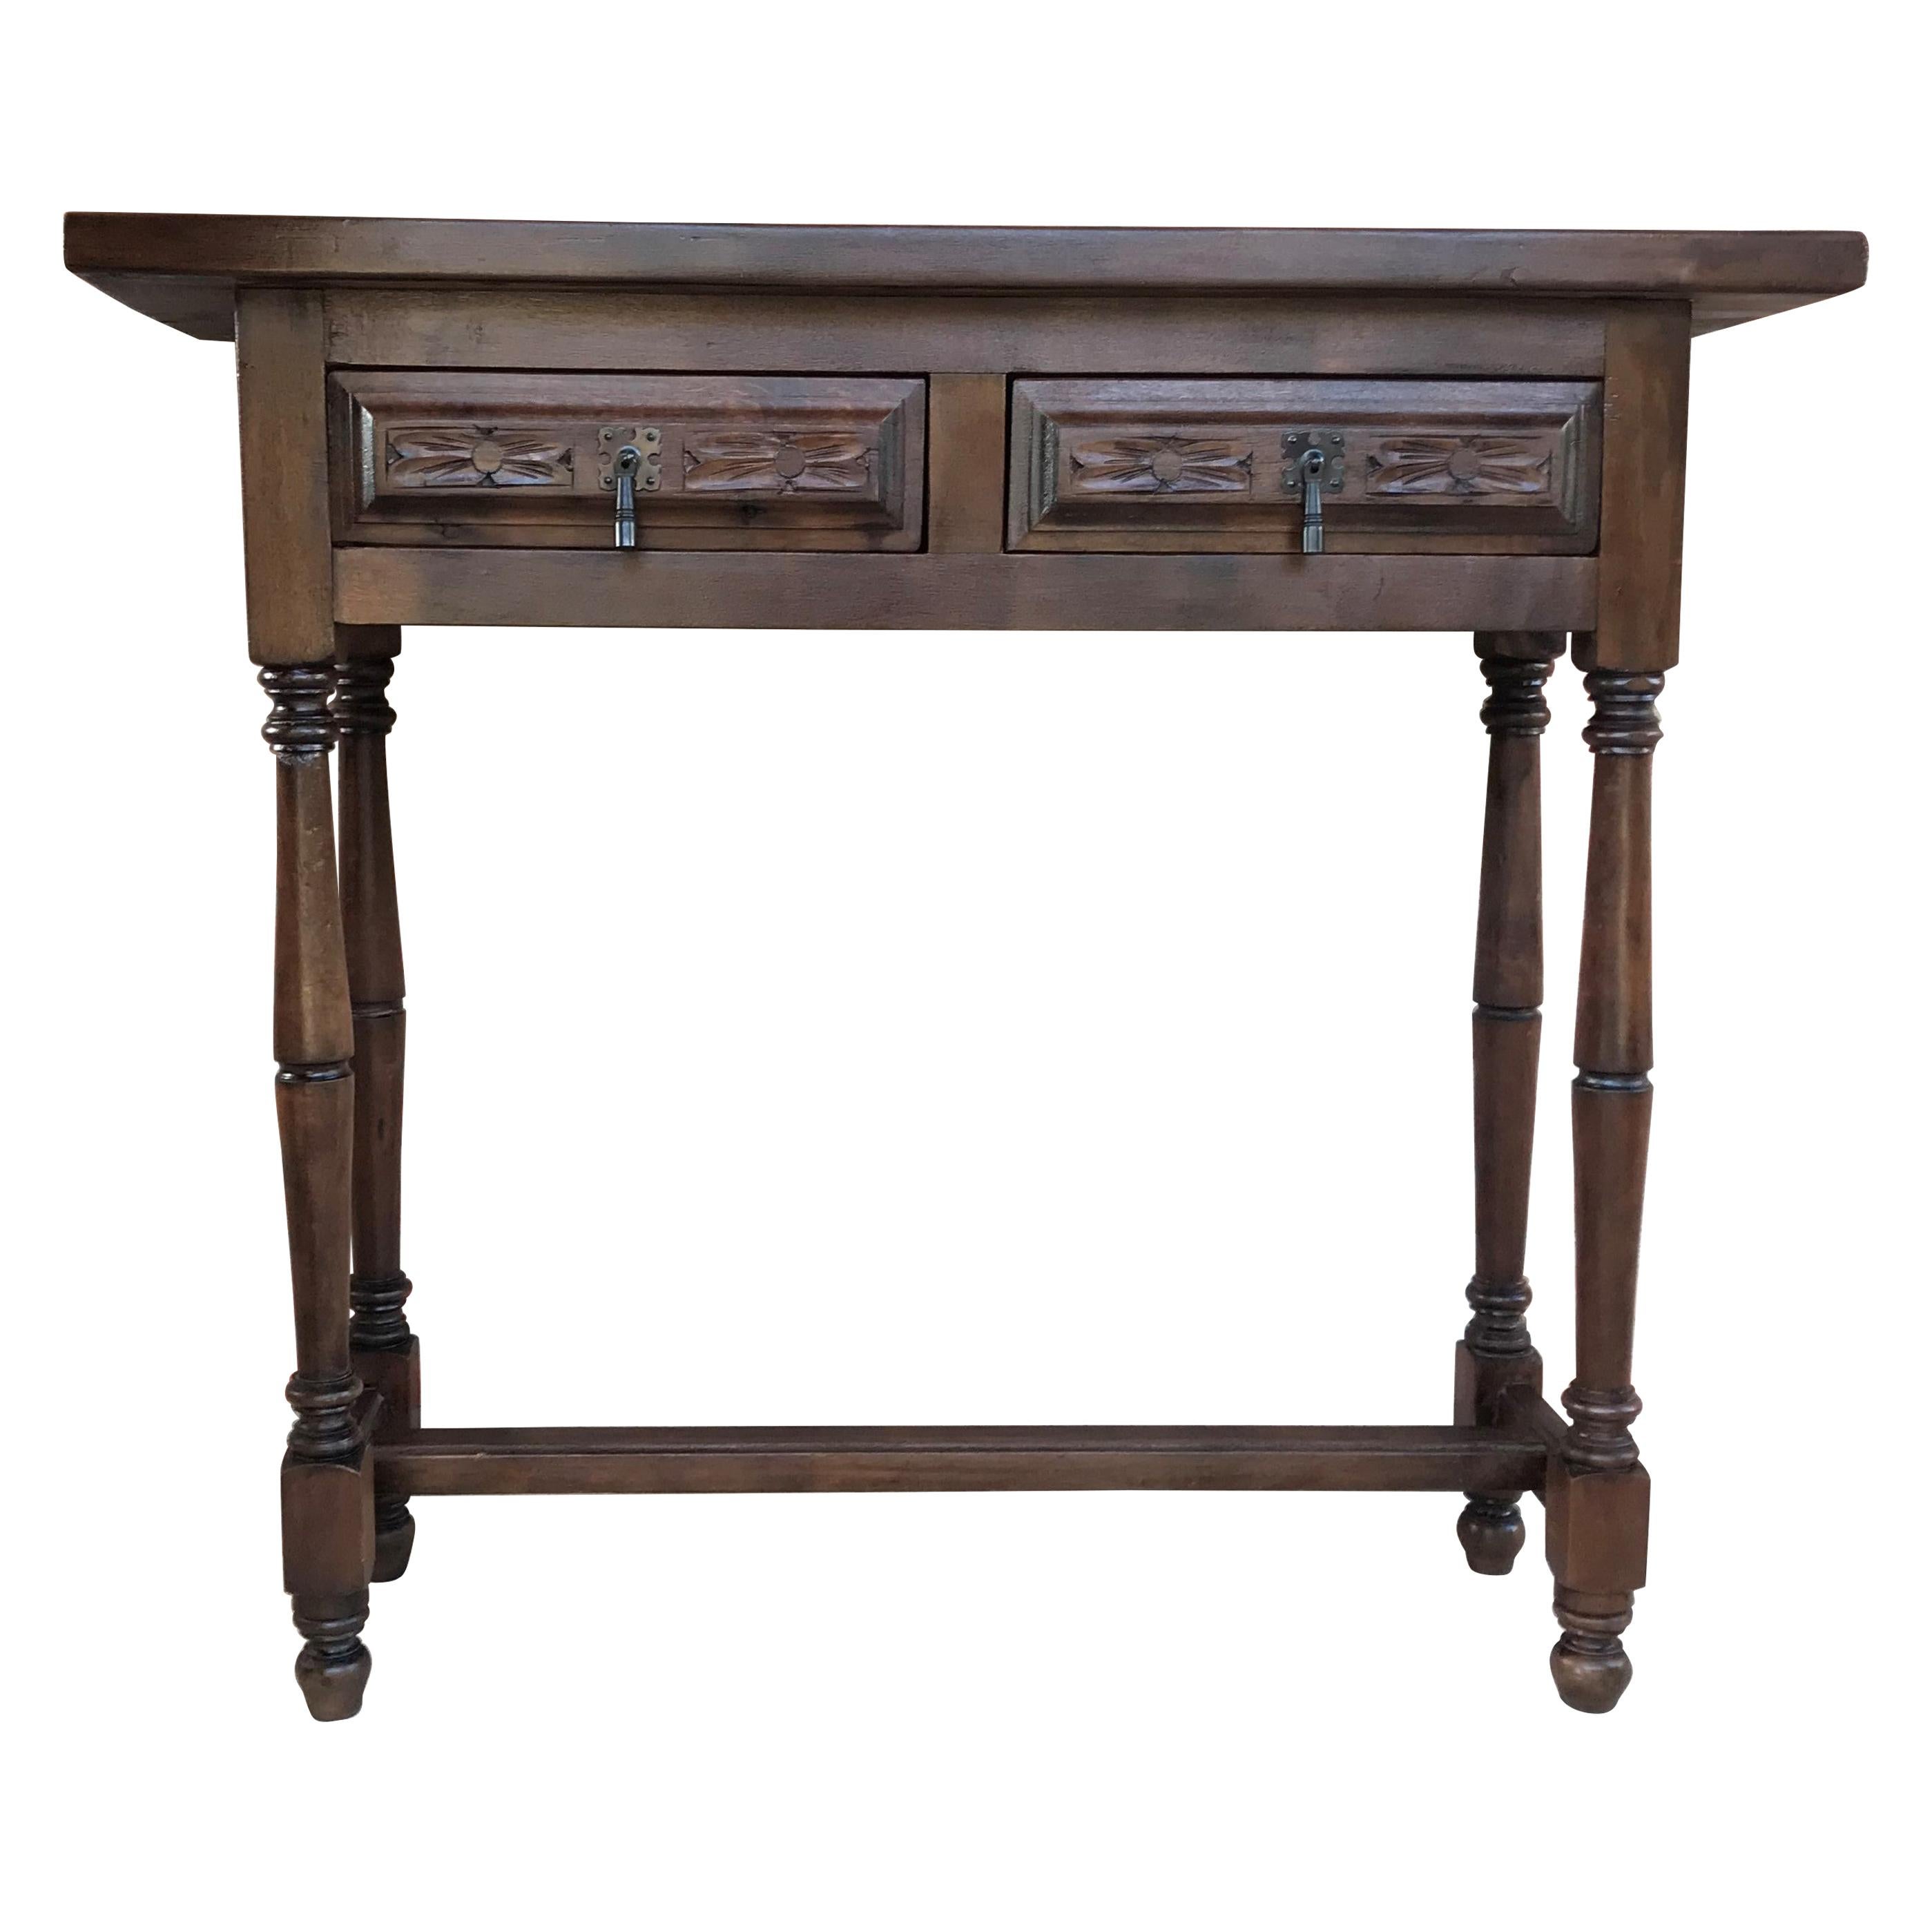 Spanish Baroque Carved Walnut Console Table with Two Drawers, circa 1890